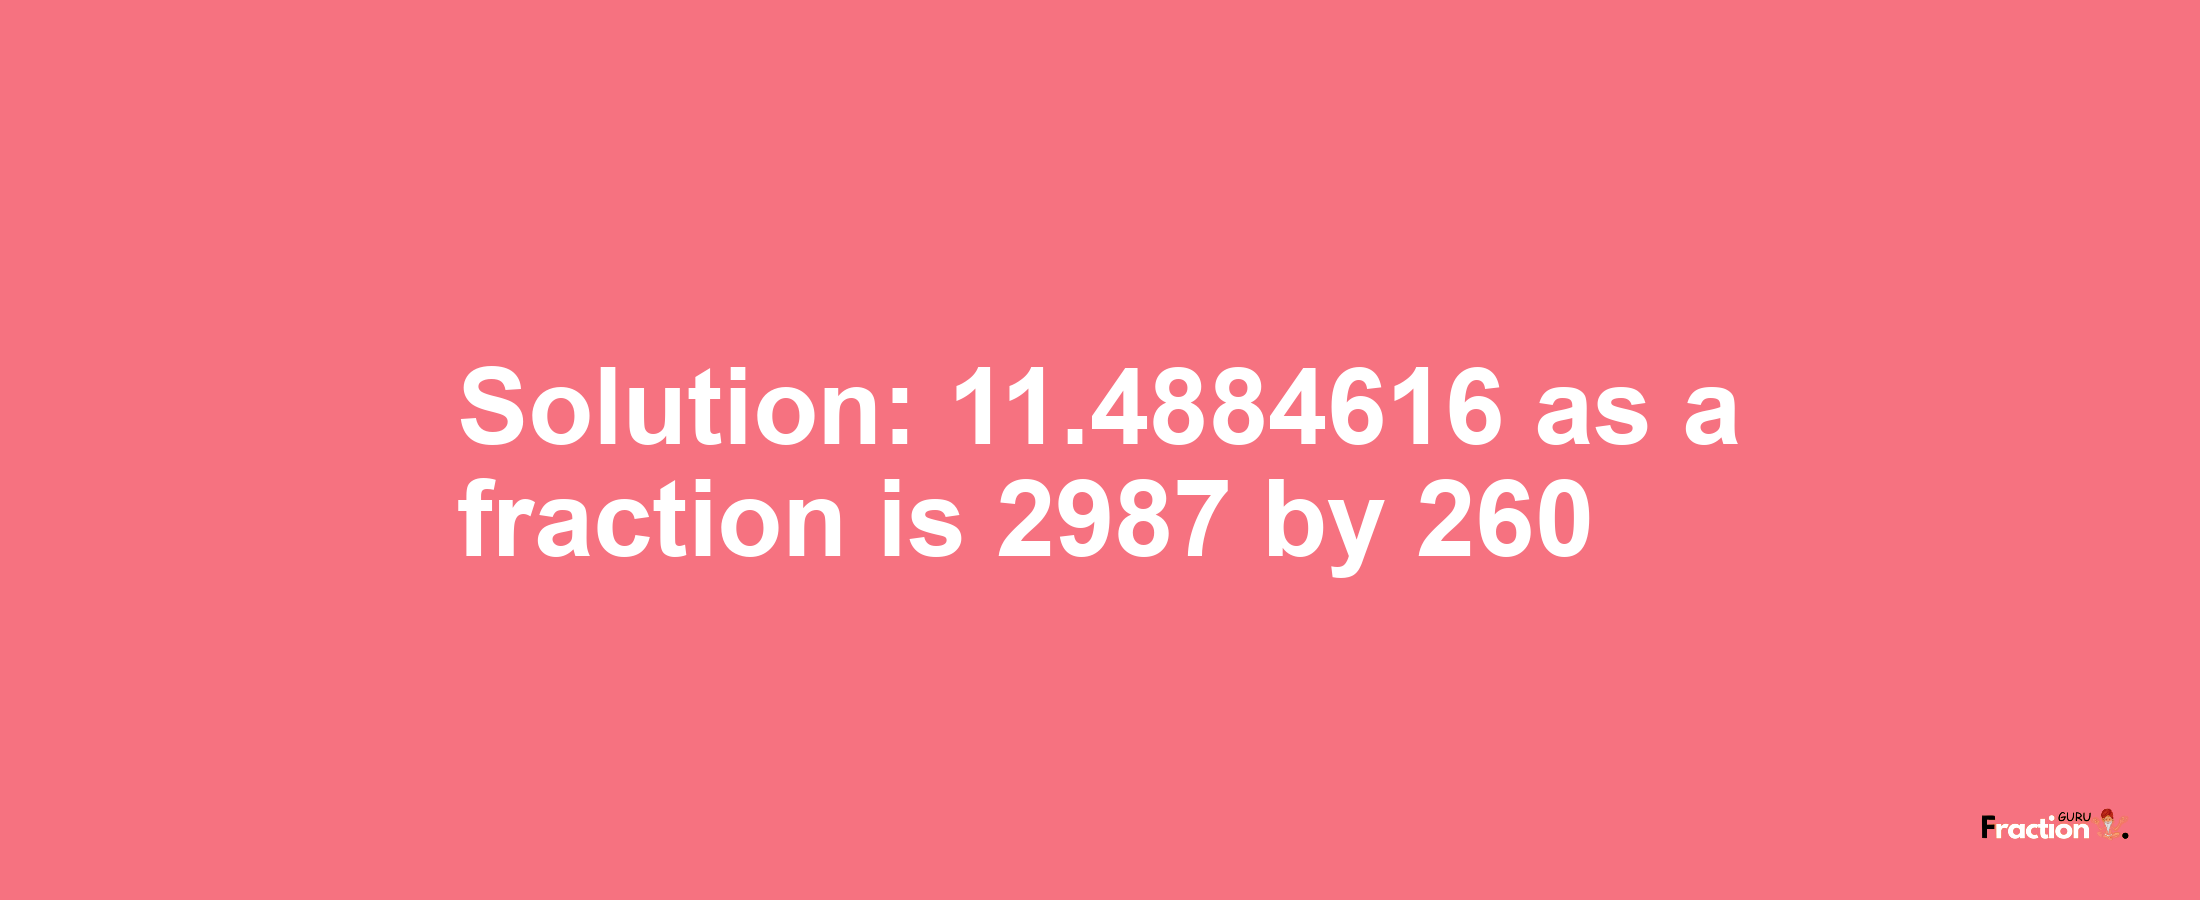 Solution:11.4884616 as a fraction is 2987/260